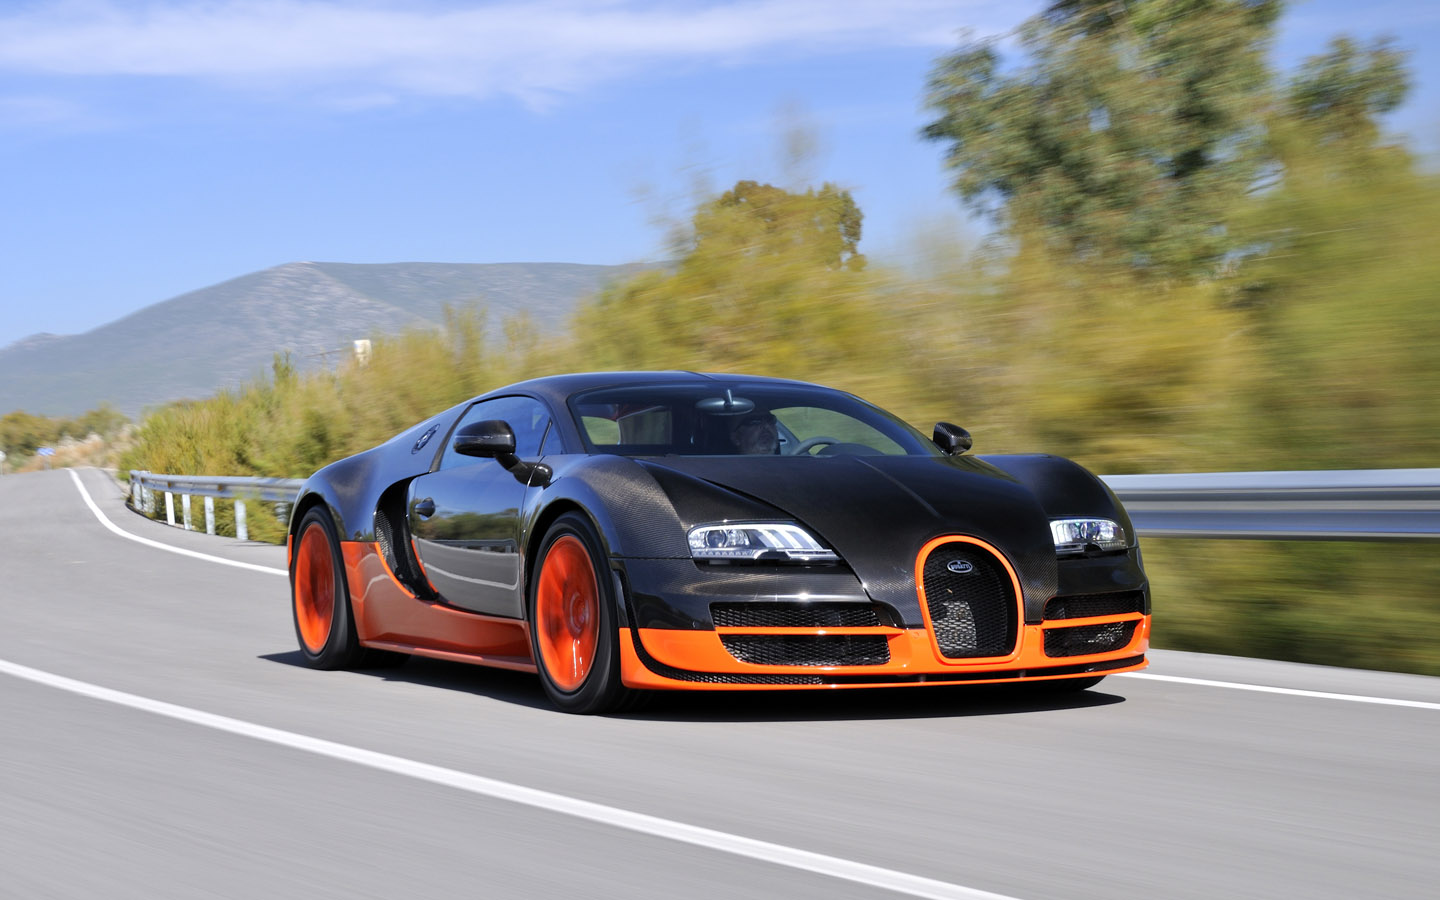 Its among the bugatti facts that the vehicle is one of the fastest production cars